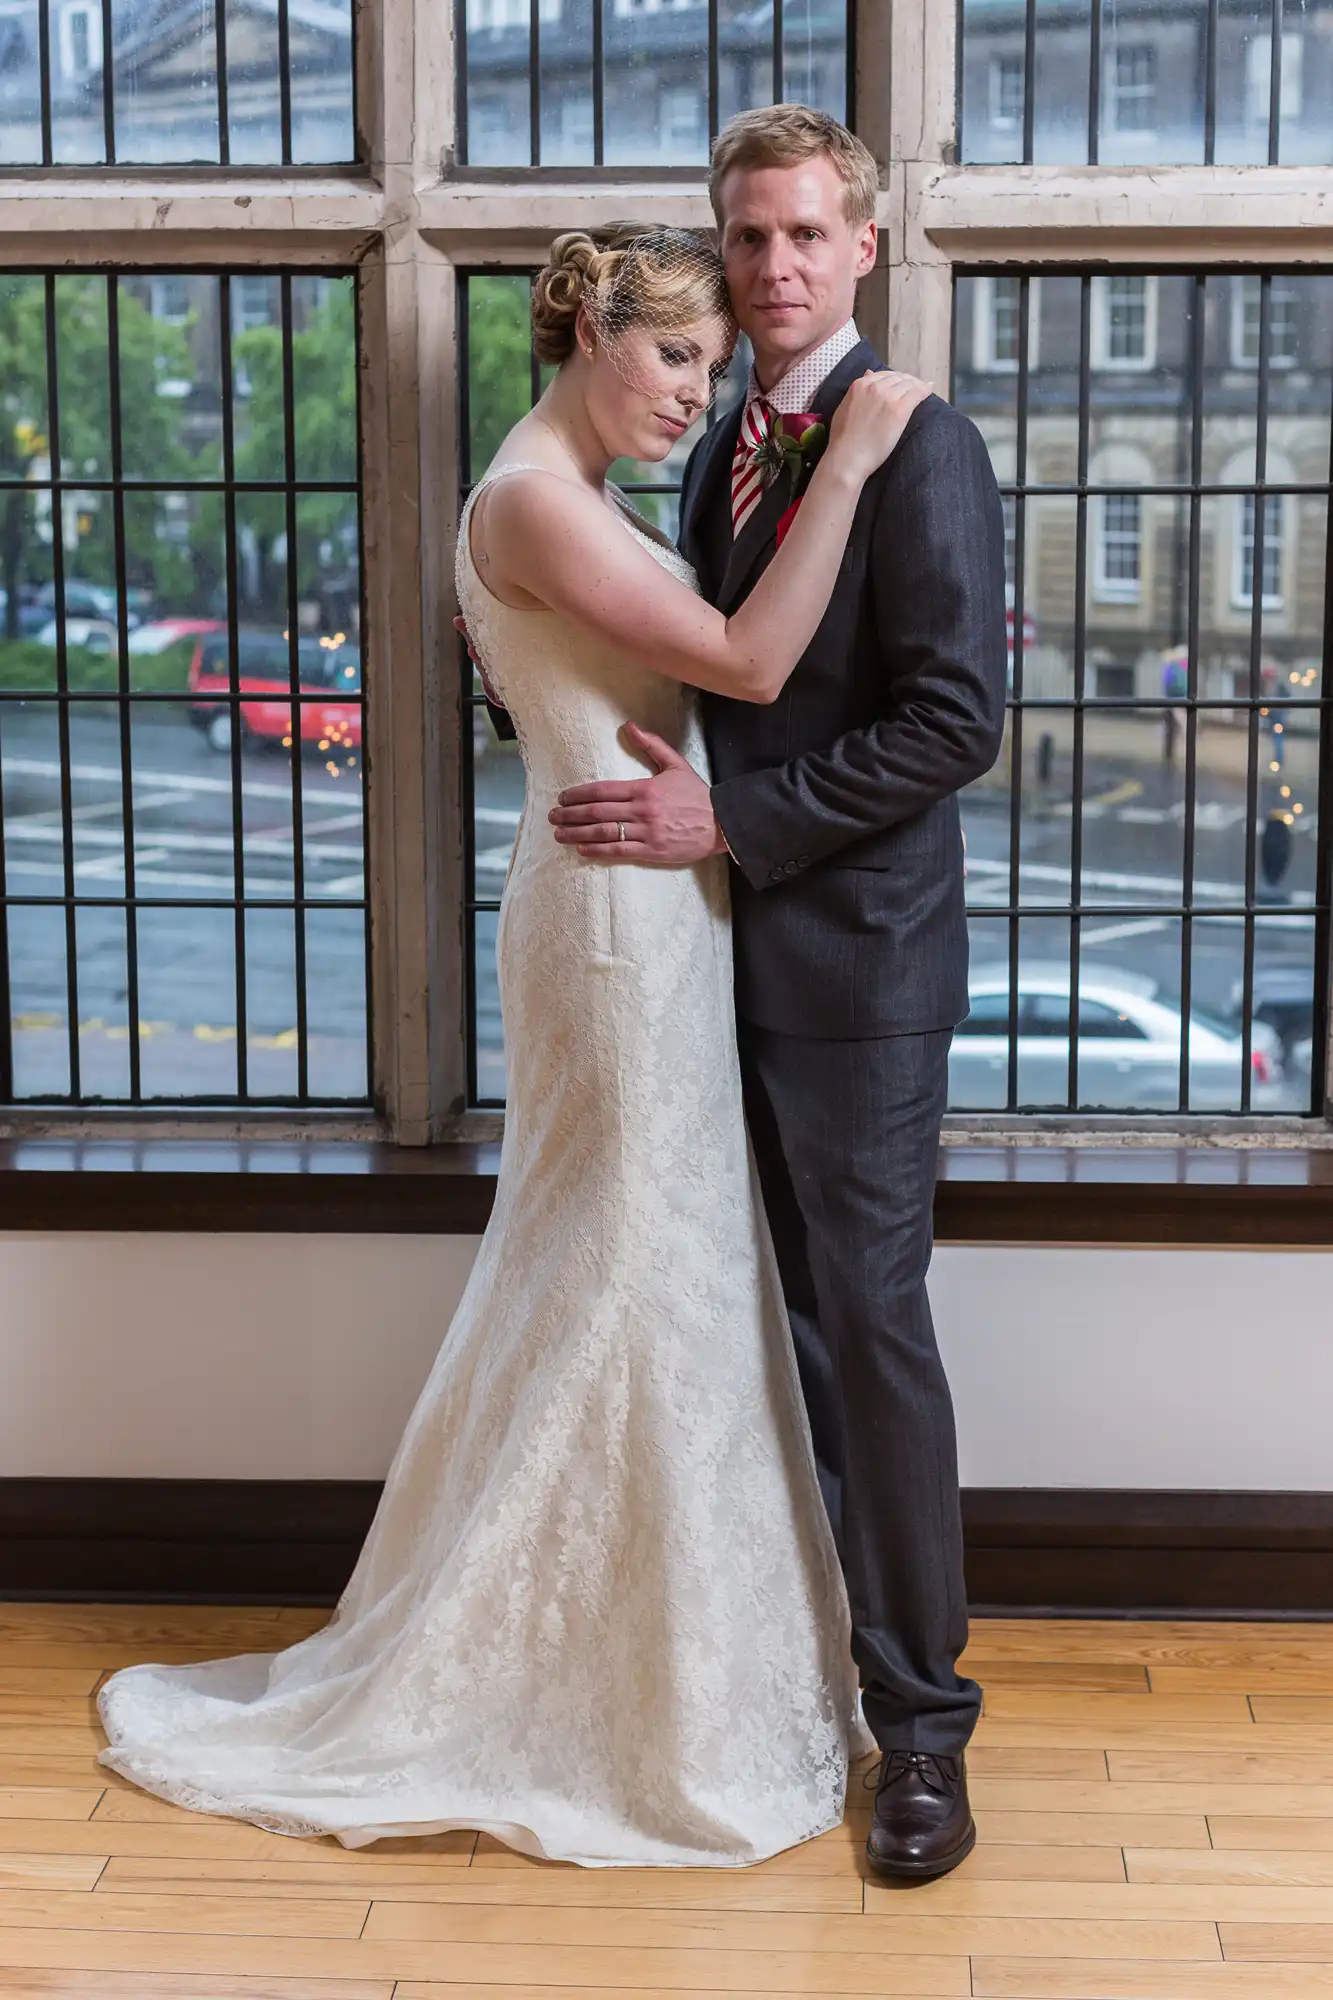 A newlywed couple posing affectionately in front of a large window with street views, the bride in an elegant lace gown and the groom in a black suit with a red boutonniere.